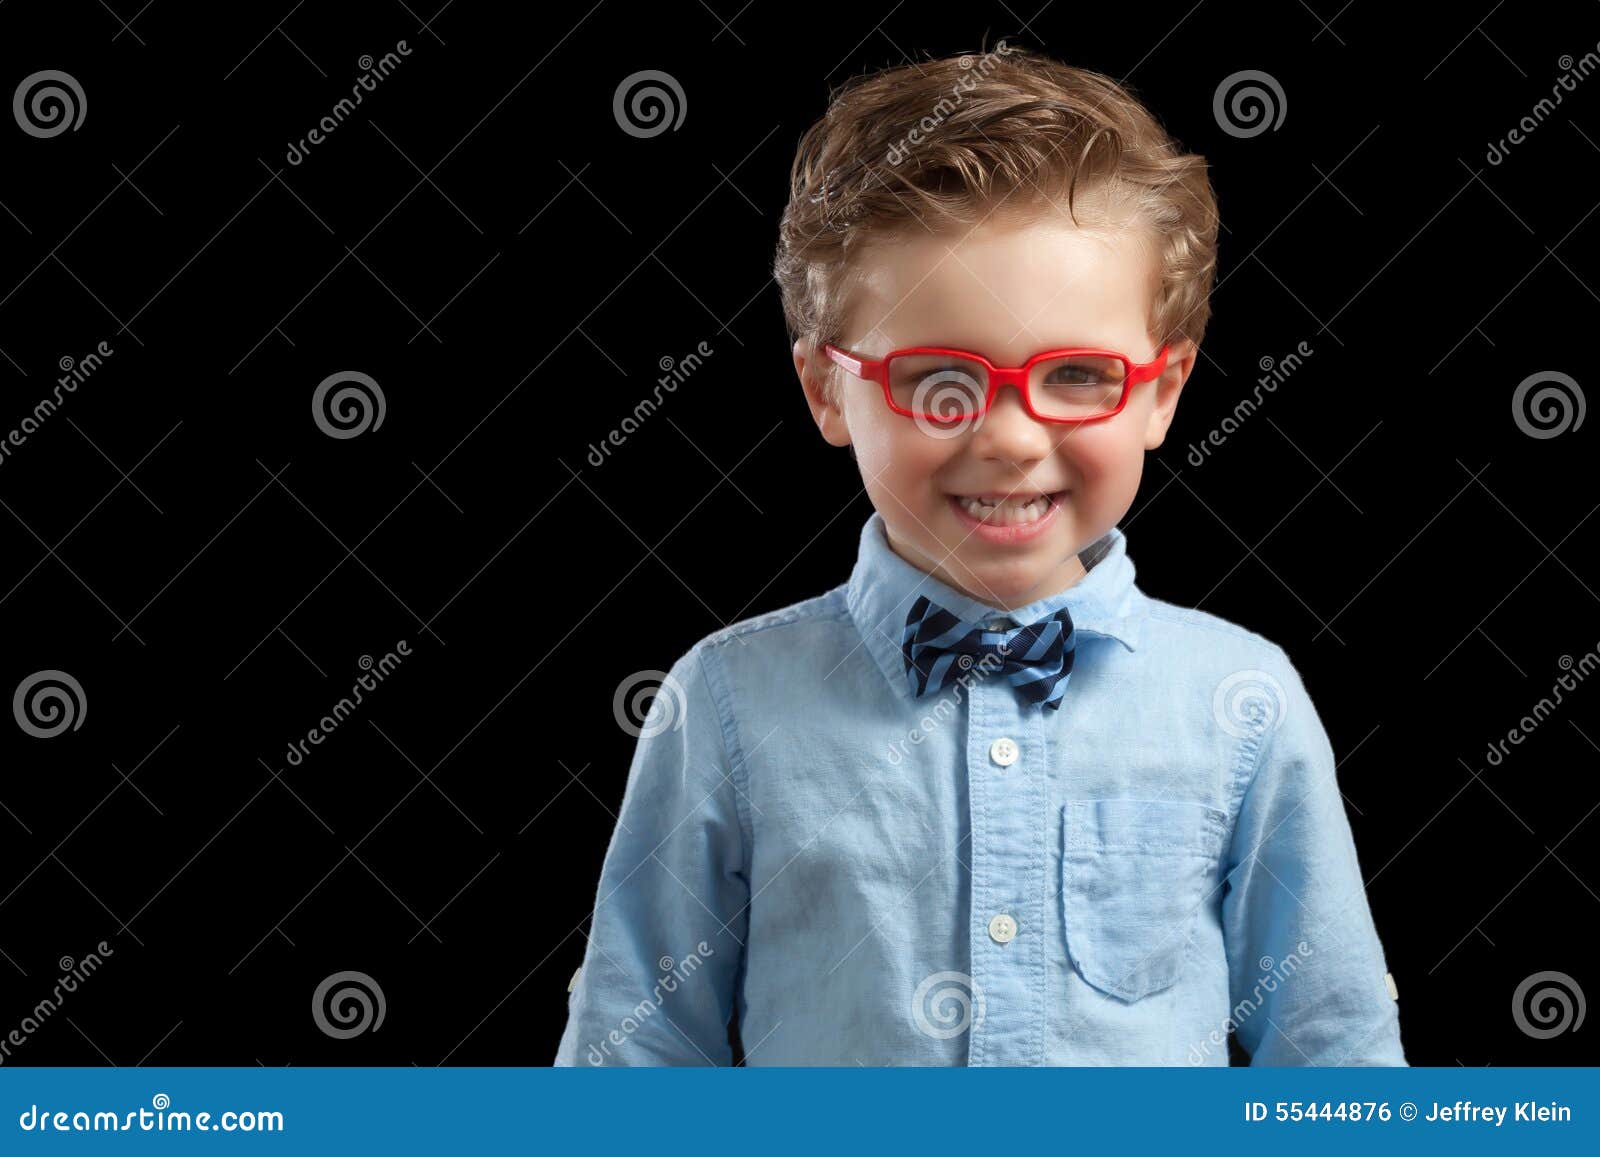 Handsome Blonde Boy with Glasses - wide 3